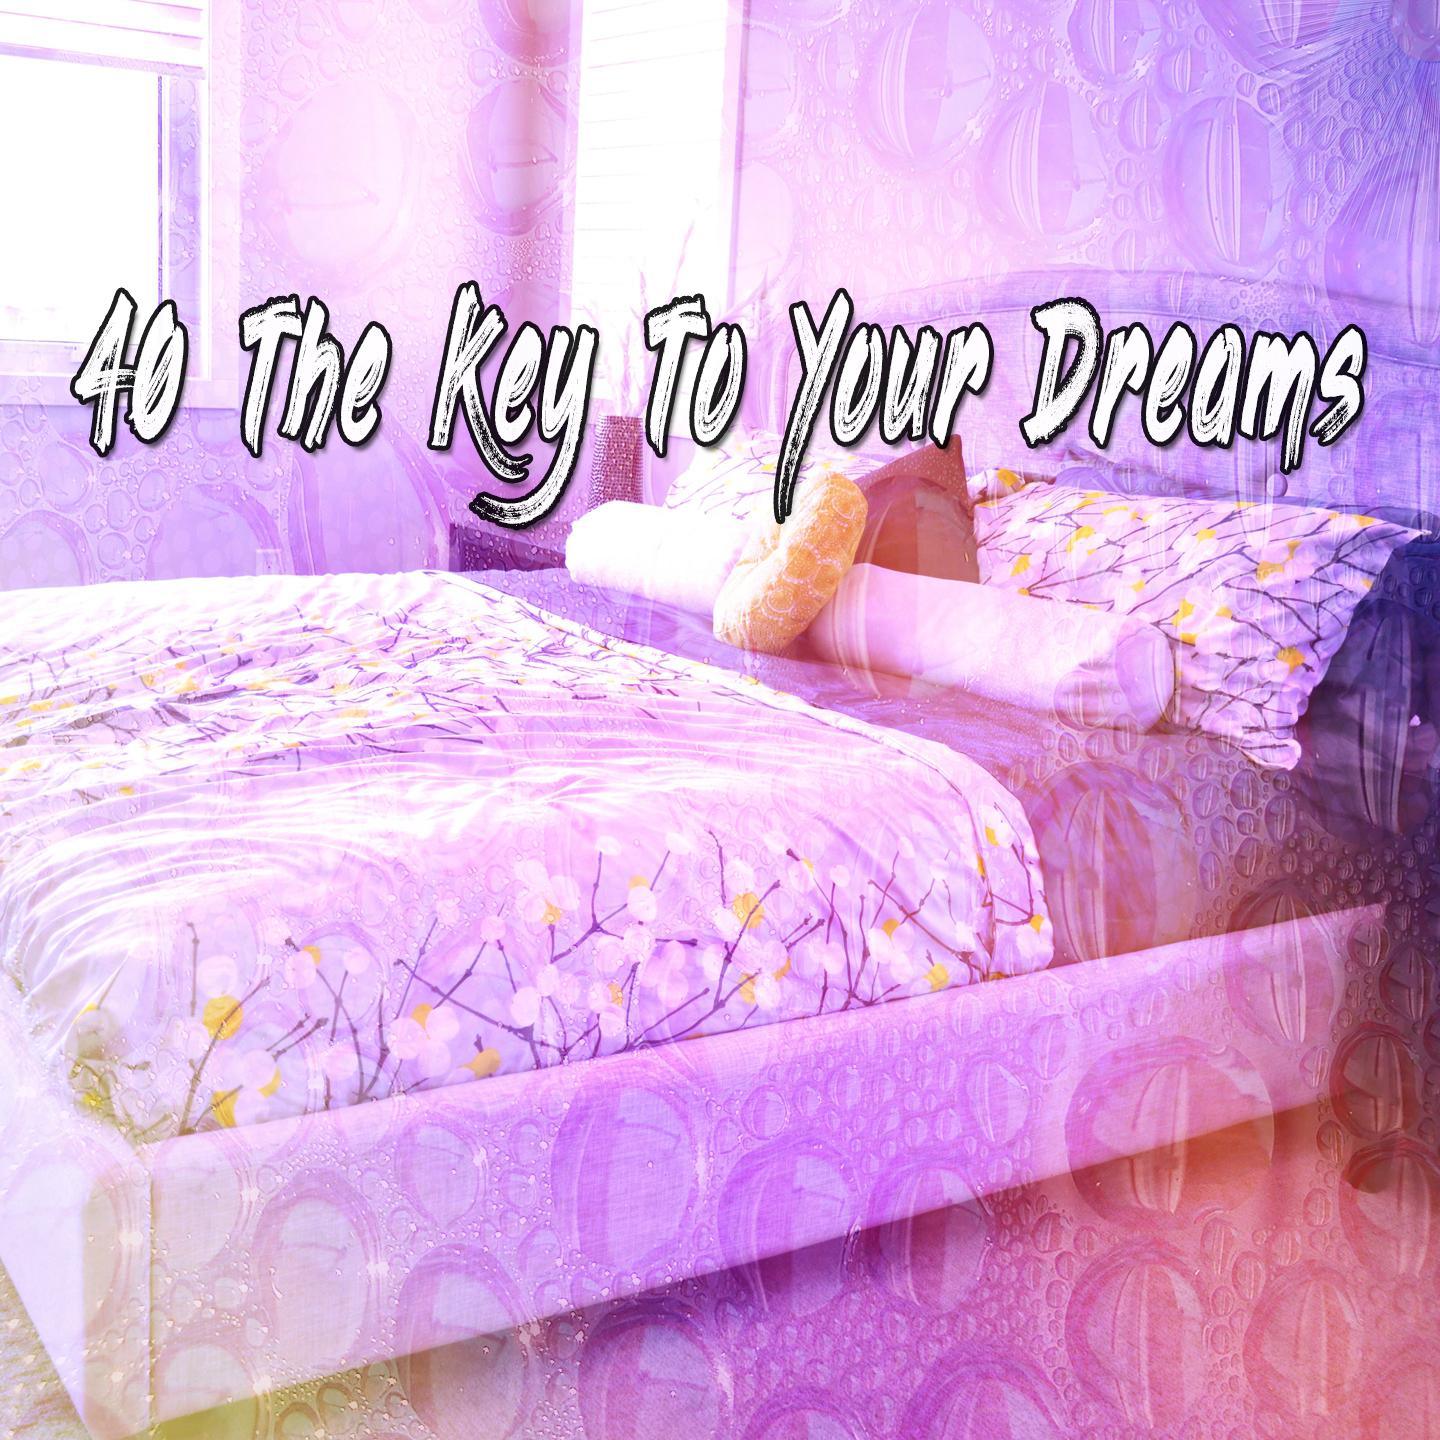 40 The Key To Your Dreams